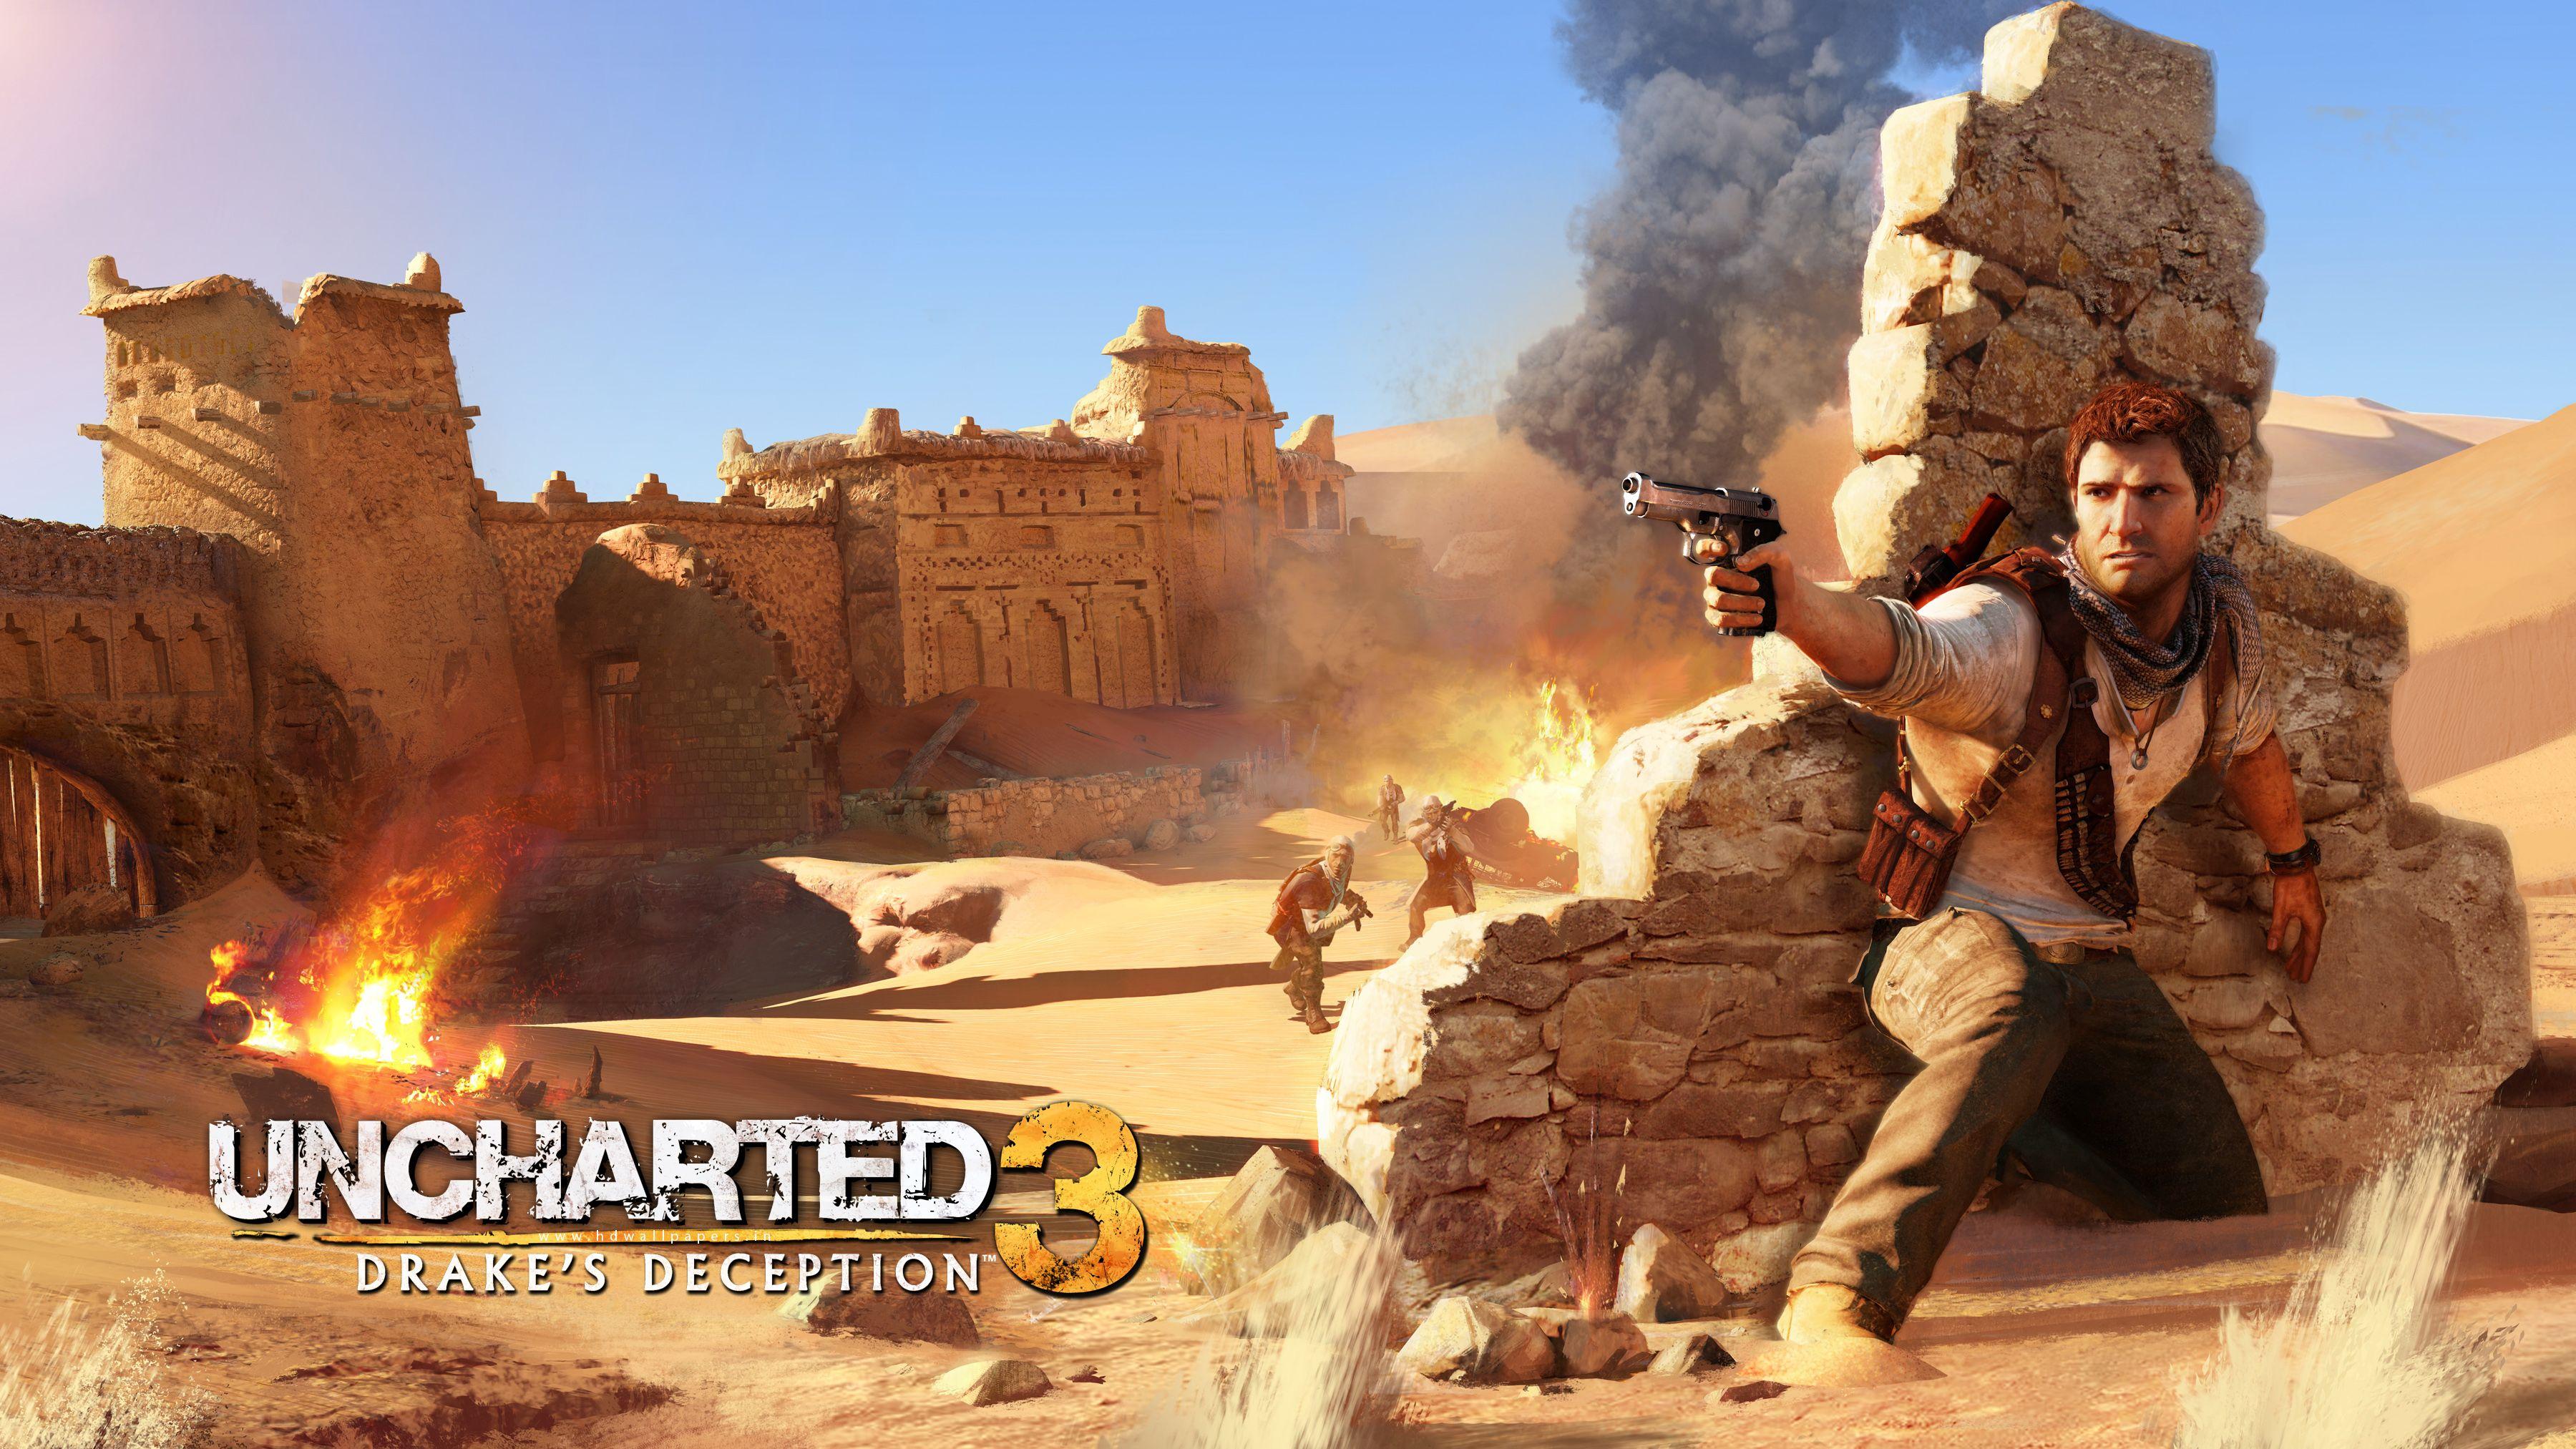 Drake In Uncharted 3 HD Wallpaper Action Adventure Games Res